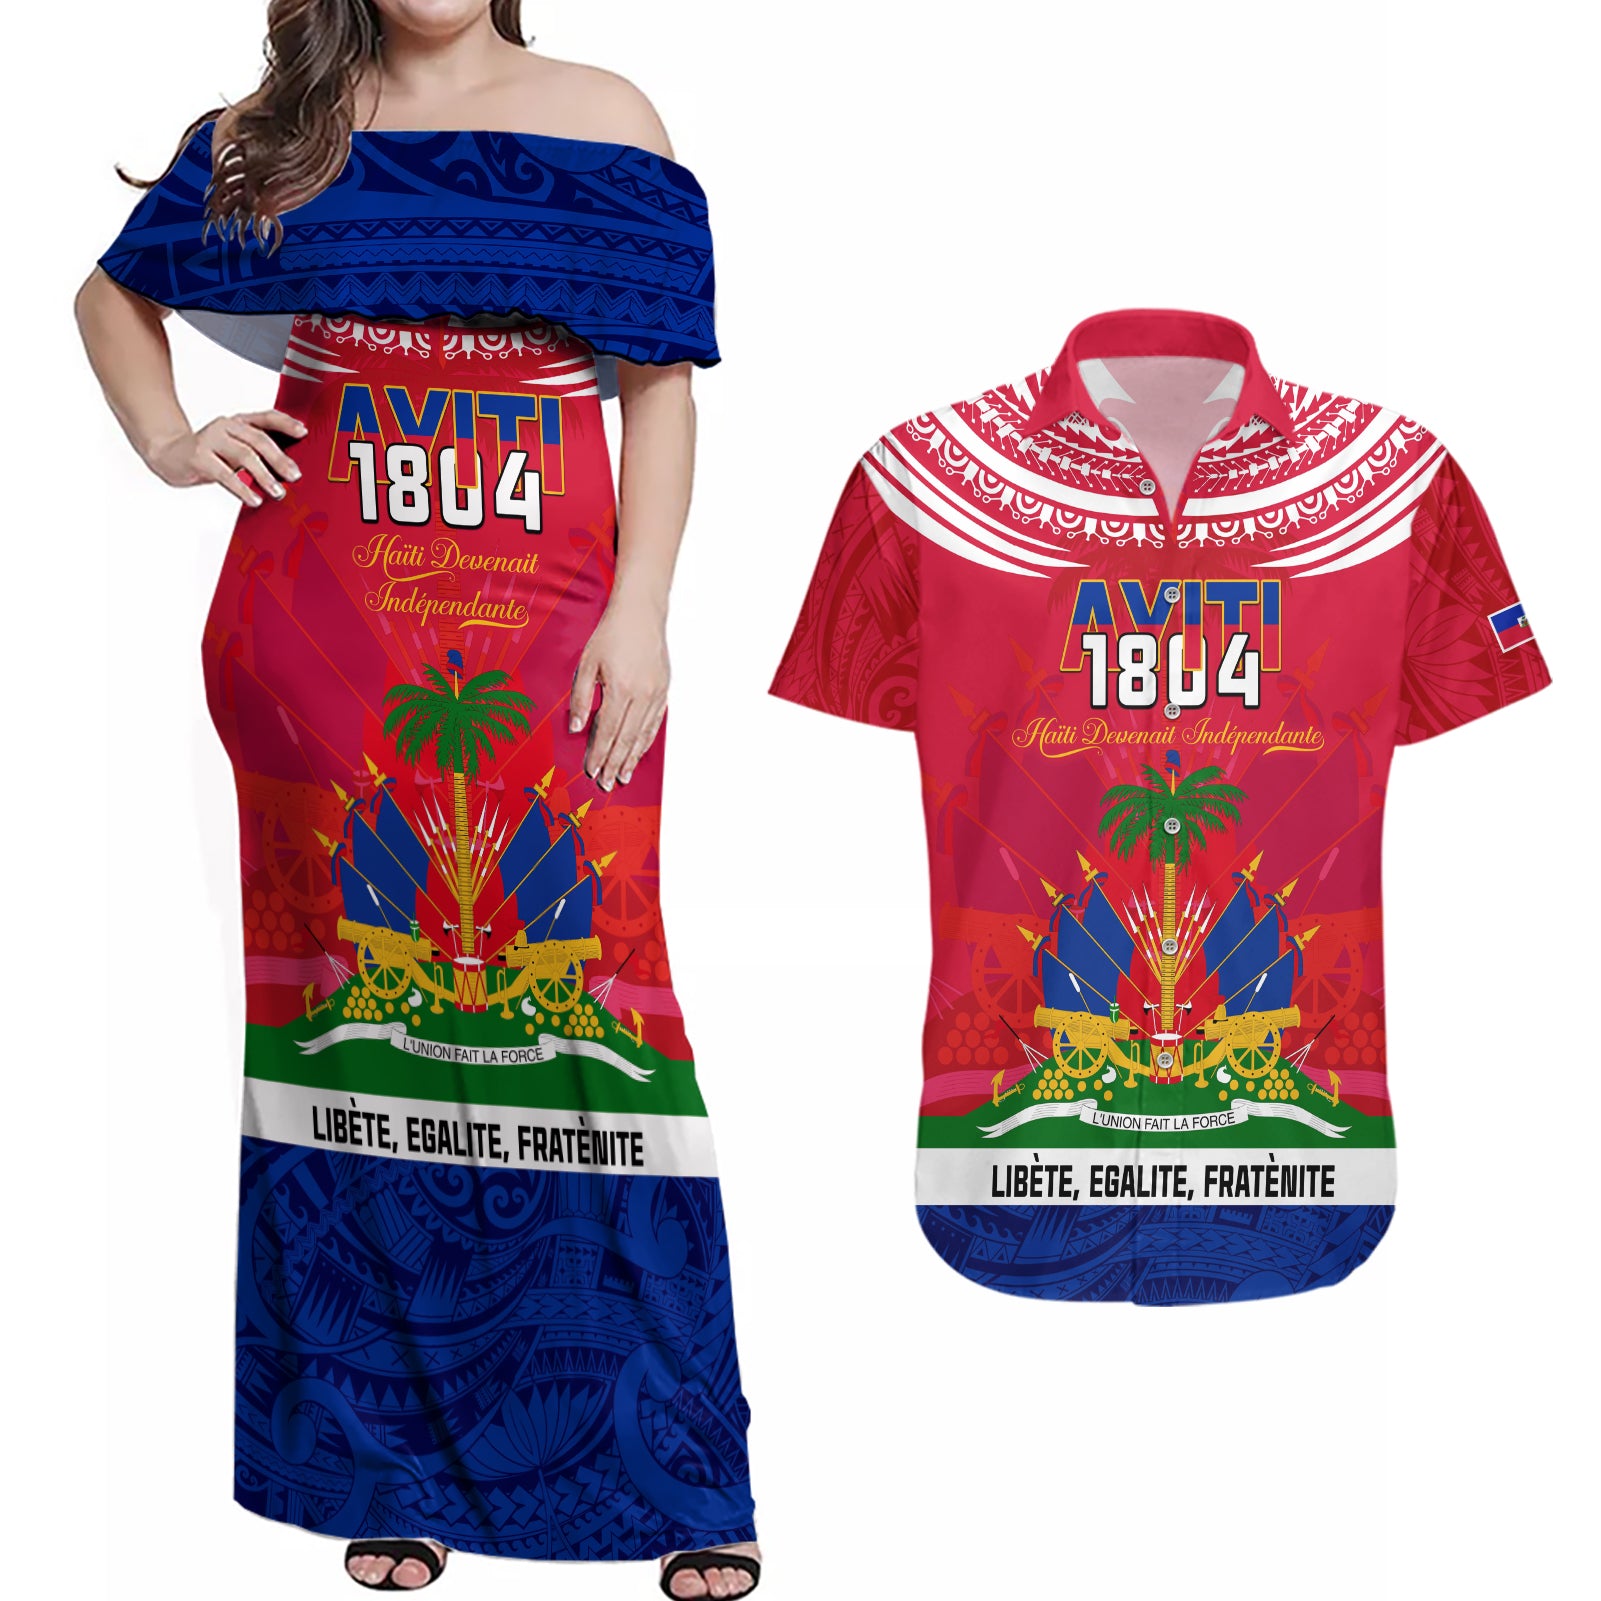 haiti-independence-day-couples-matching-off-shoulder-maxi-dress-and-hawaiian-shirt-libete-egalite-fratenite-ayiti-1804-with-polynesian-pattern